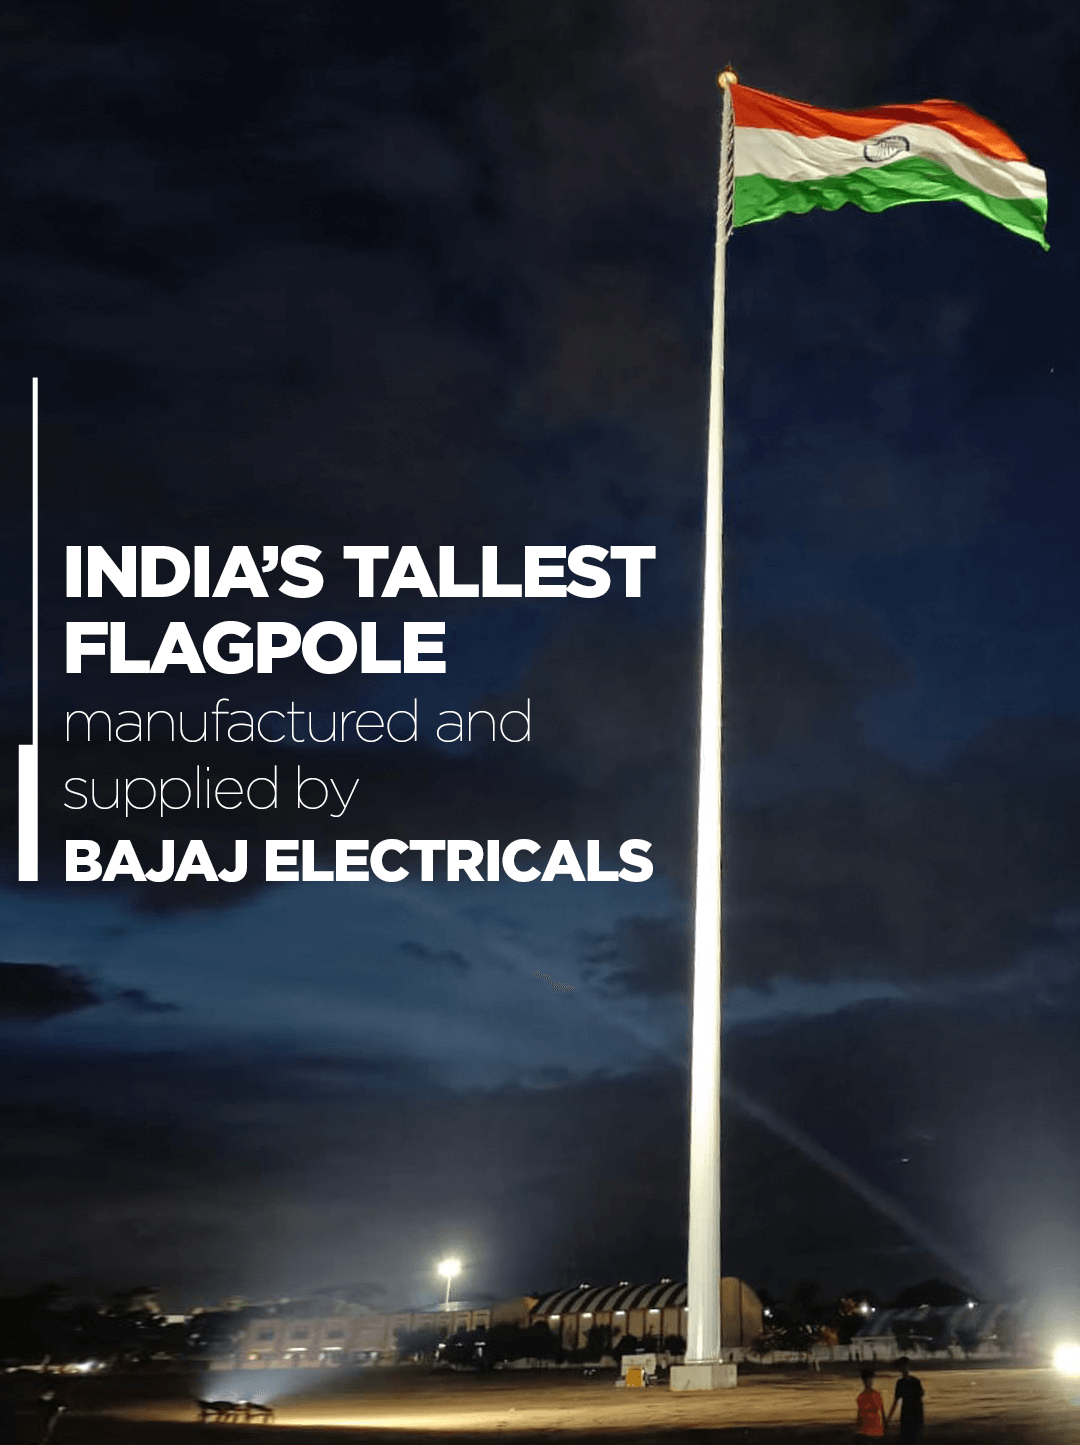 Bajaj Electricals Manufactures and Supplies